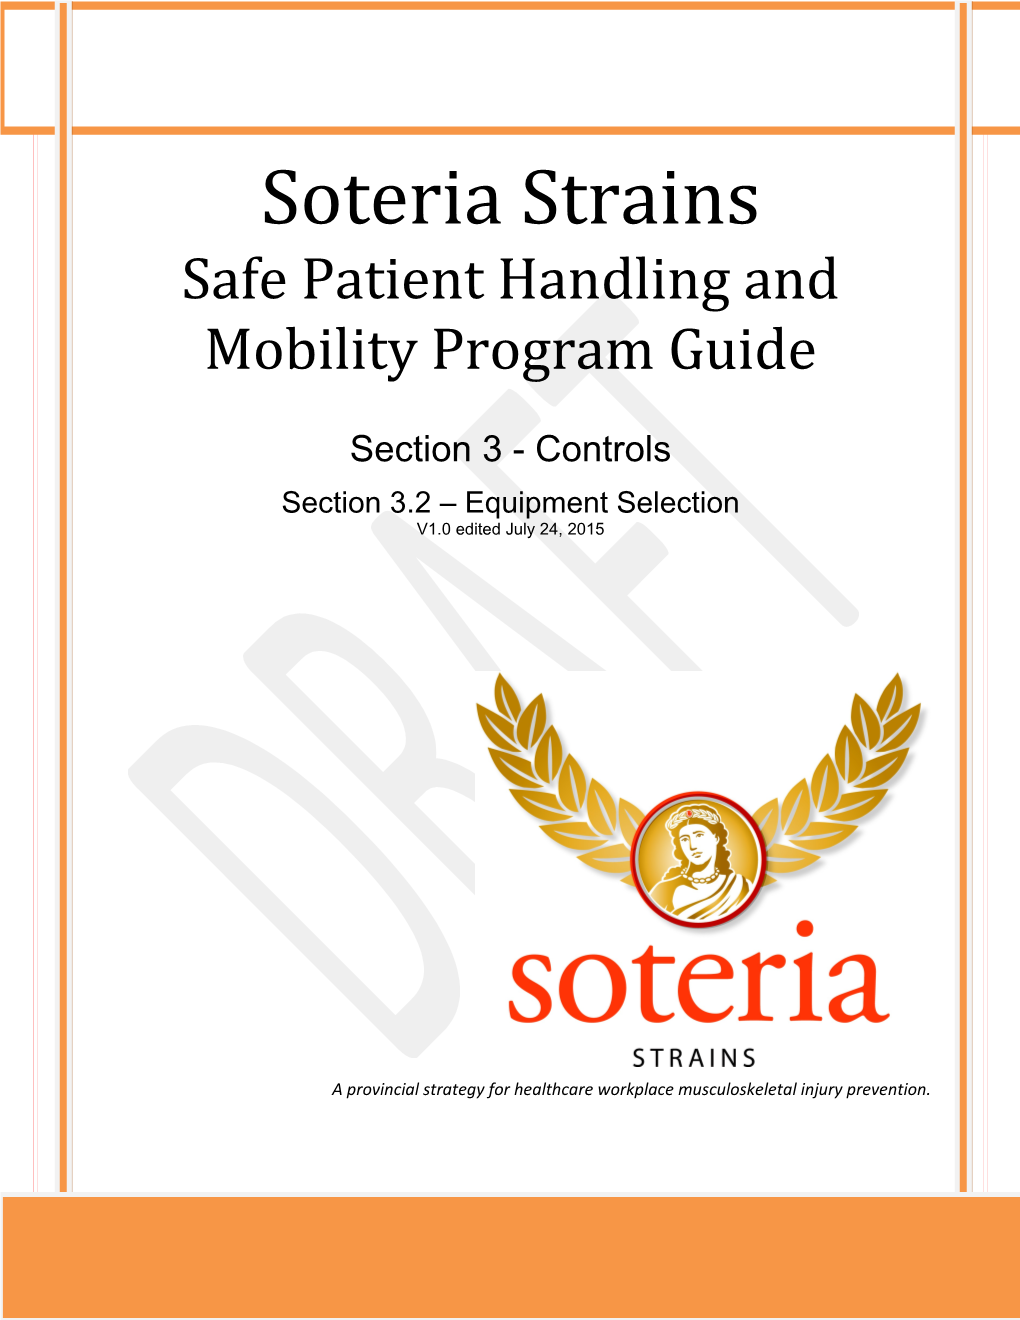 Safe Patient Handling and Mobility Program Guide